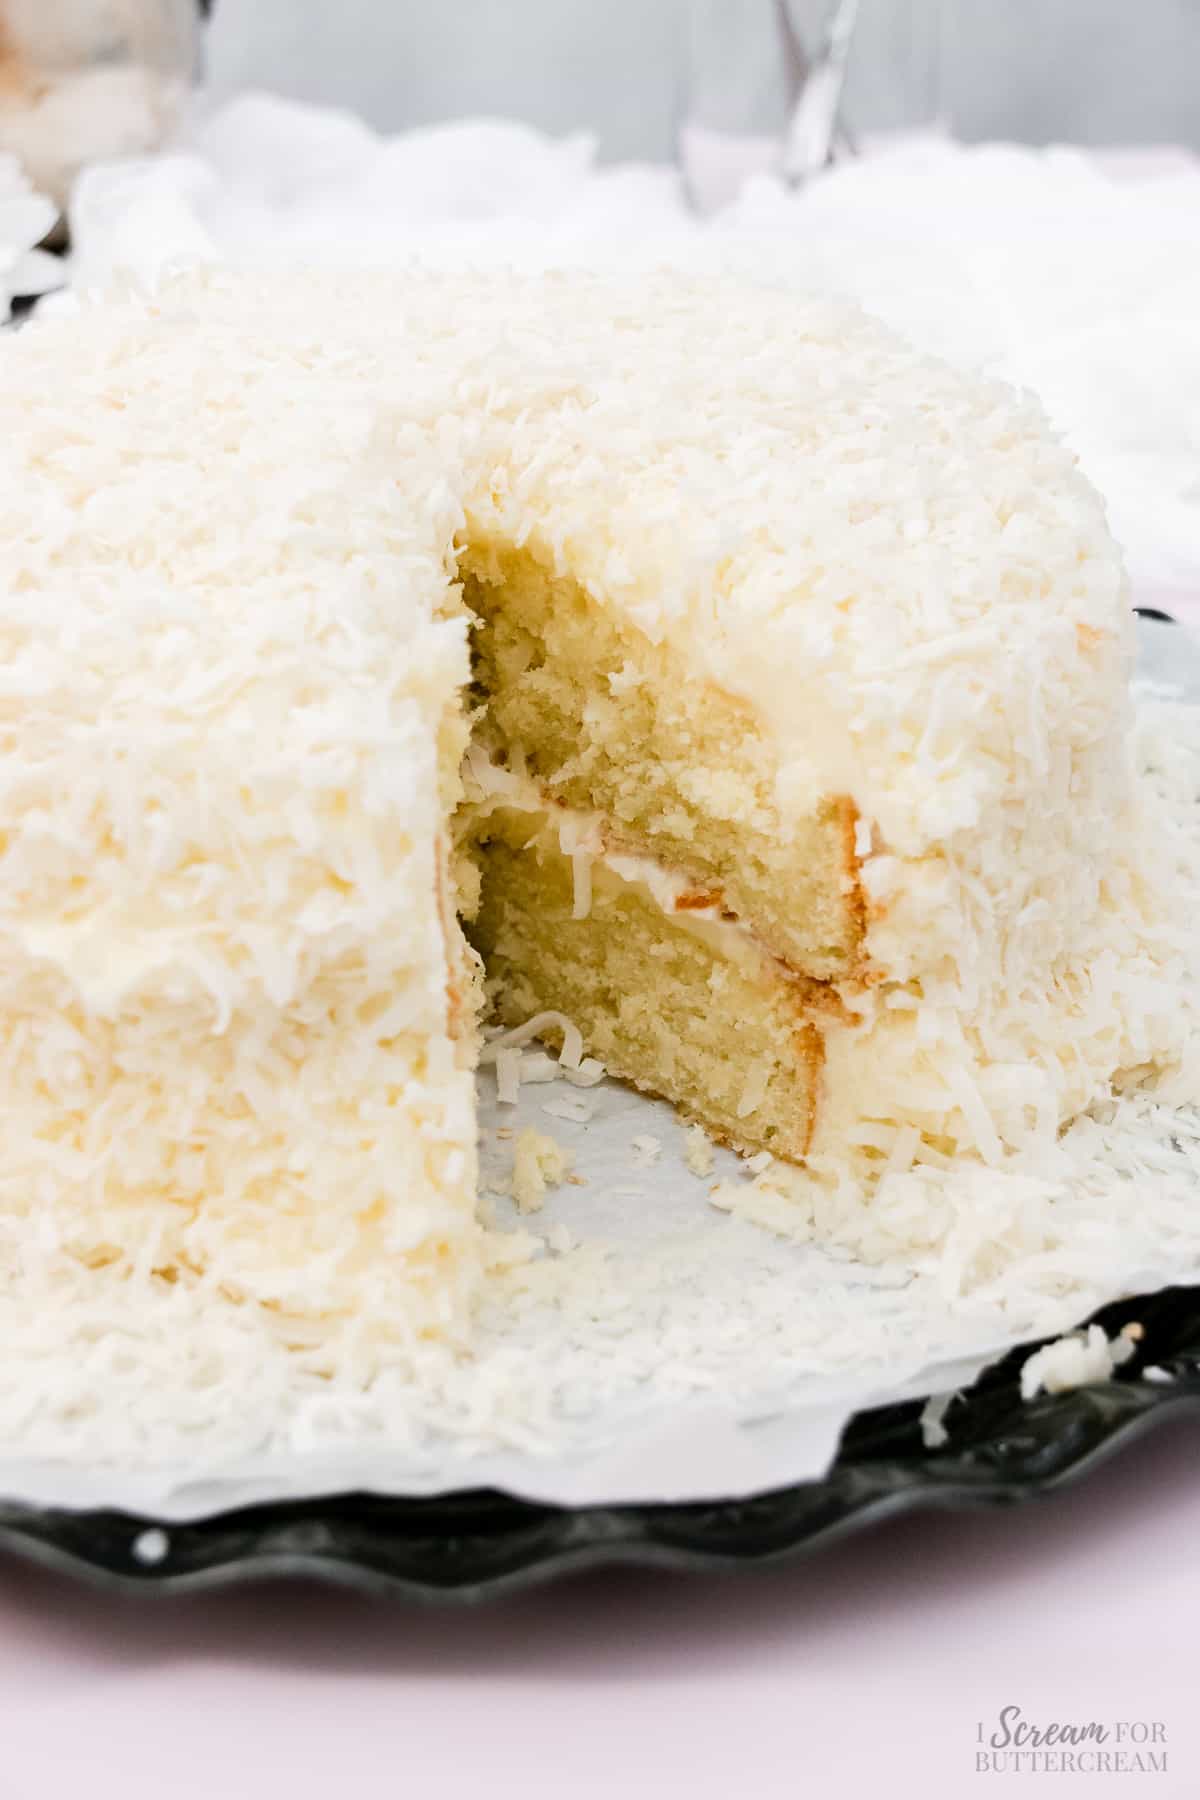 Cake with shredded coconut covering it.